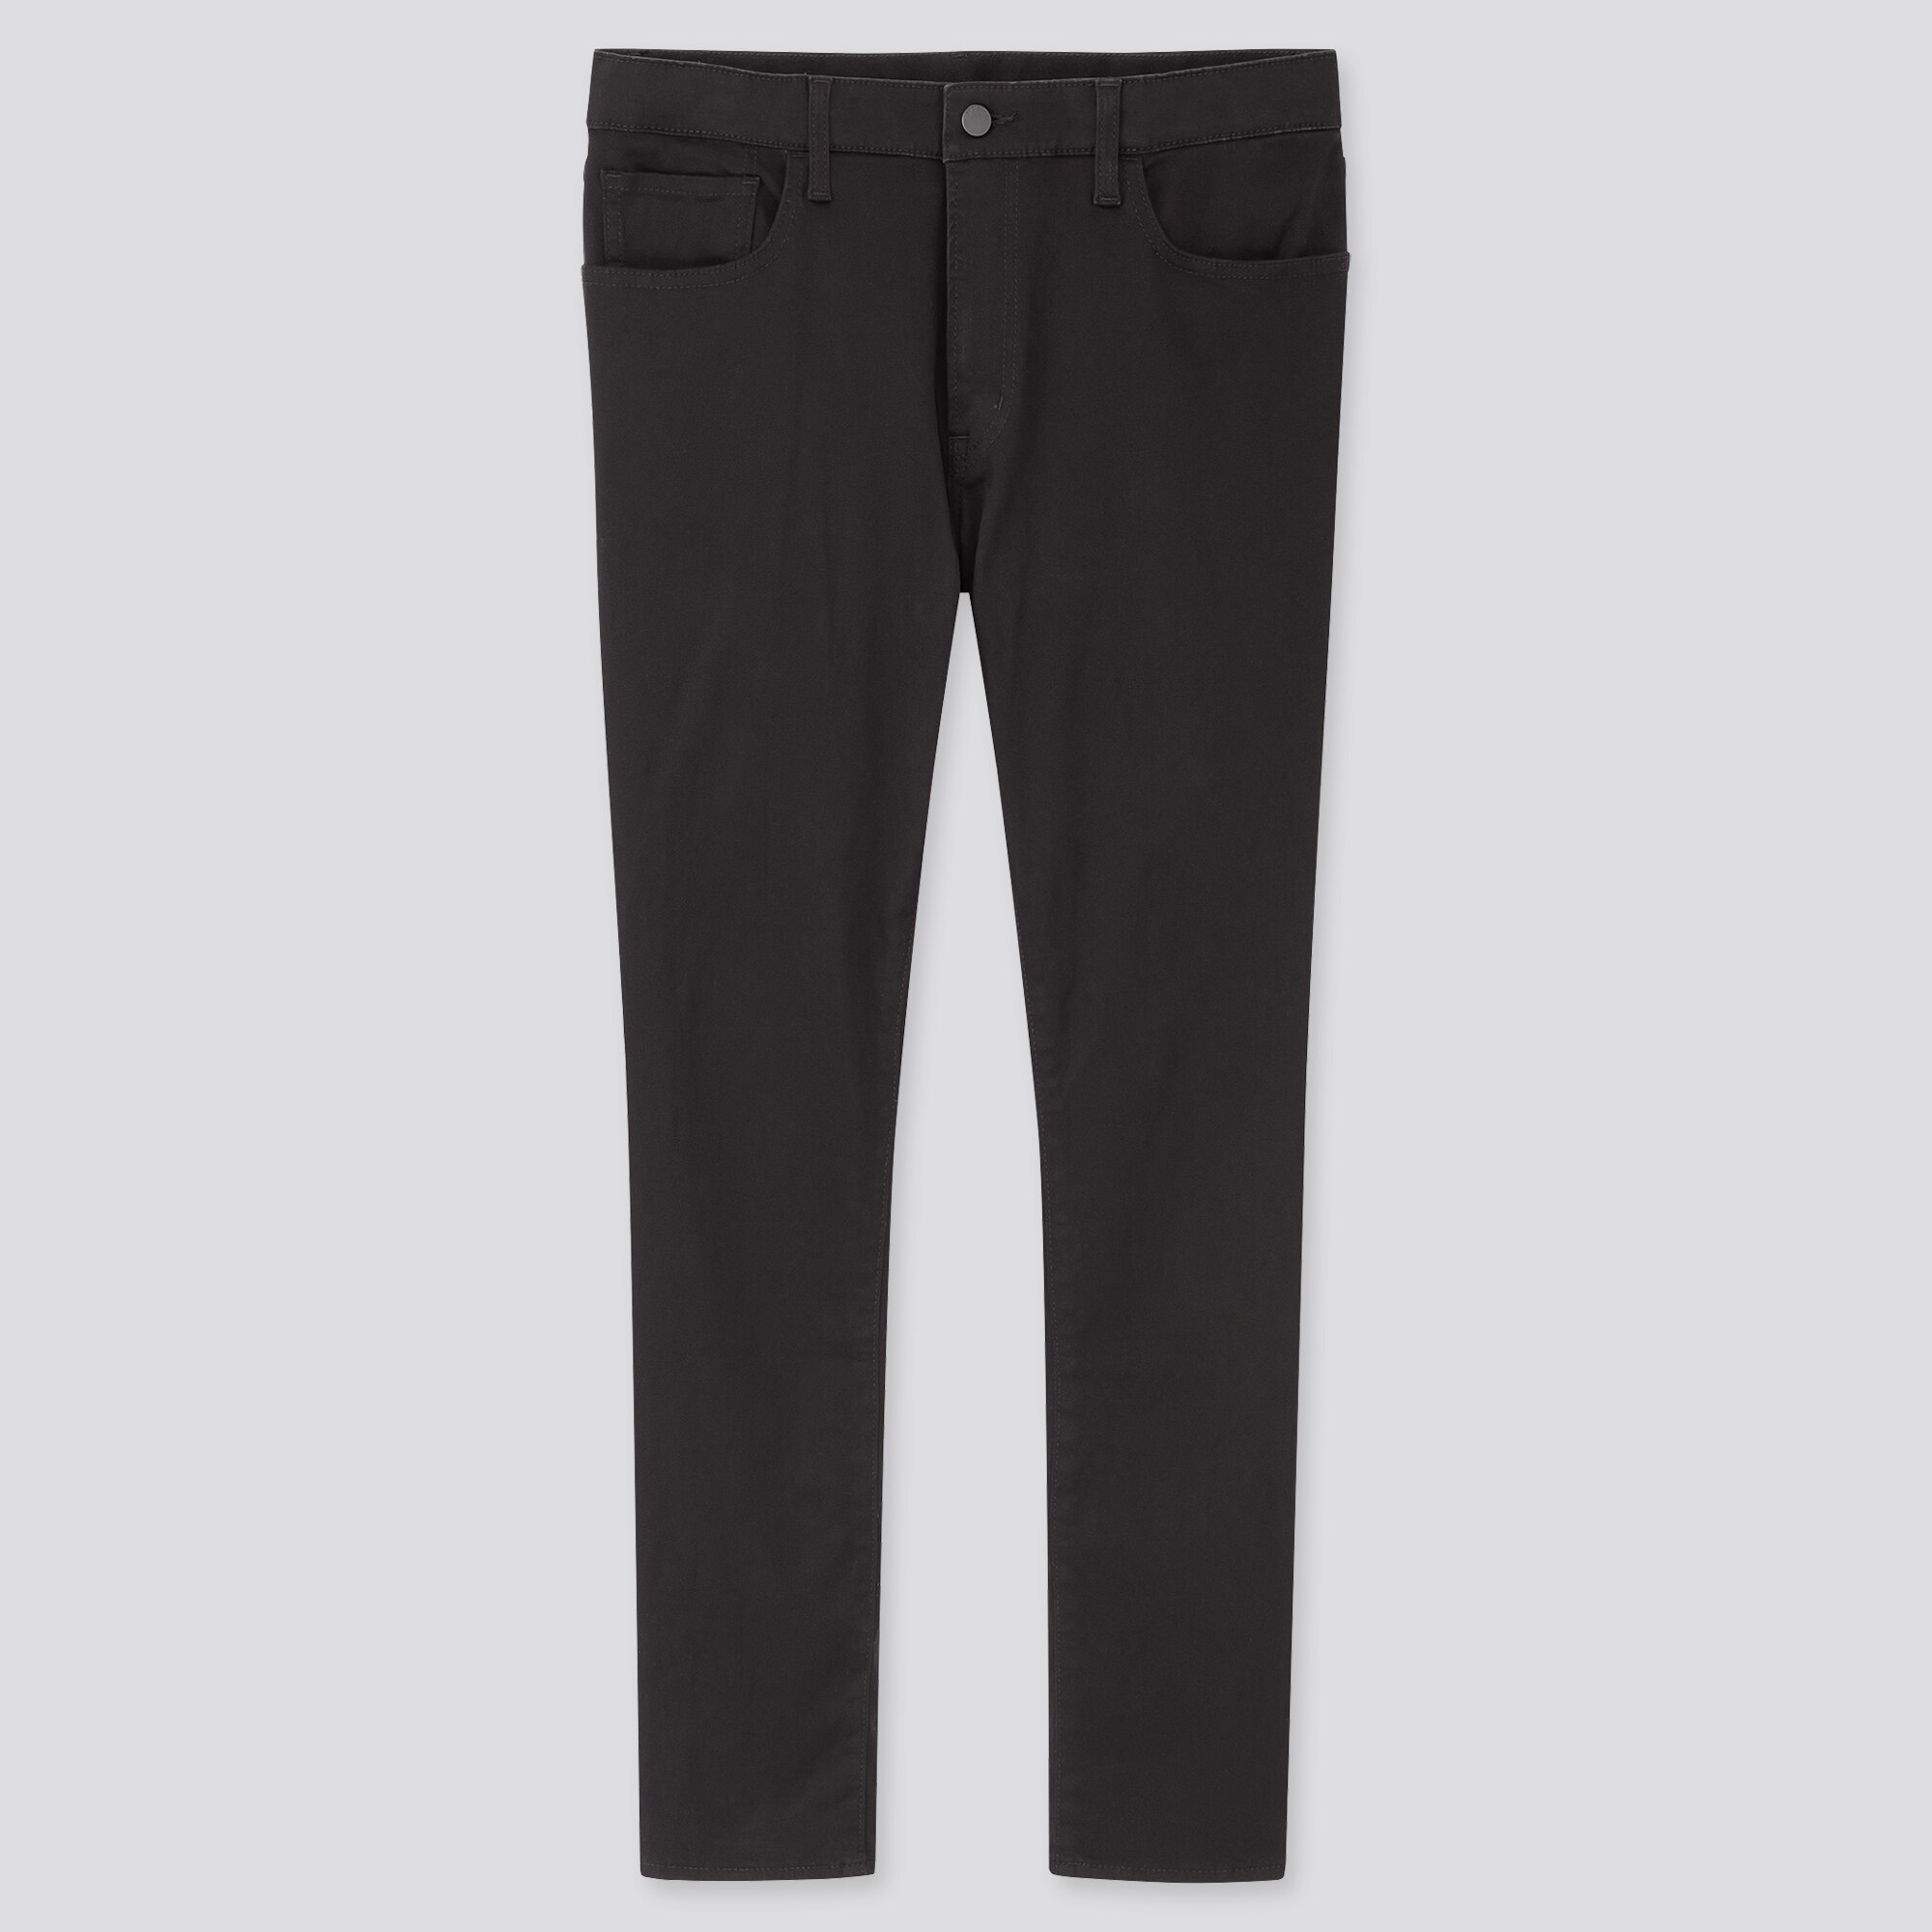 uniqlo ezy skinny fit jeans